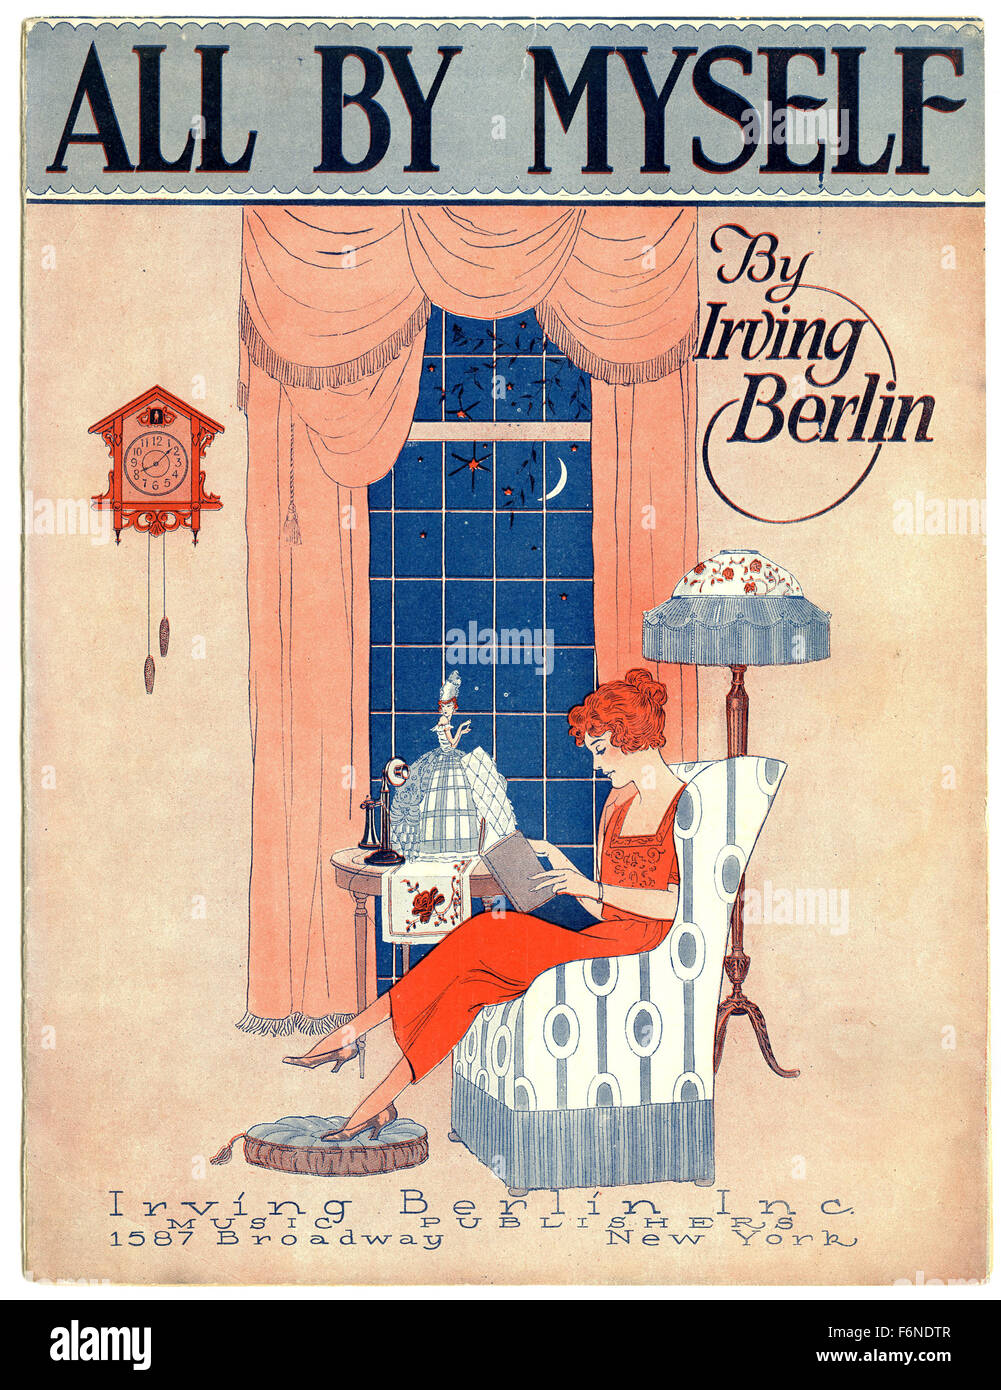 All By Myself (1921) d'Irving Berlin piano sheet music couvrir Banque D'Images